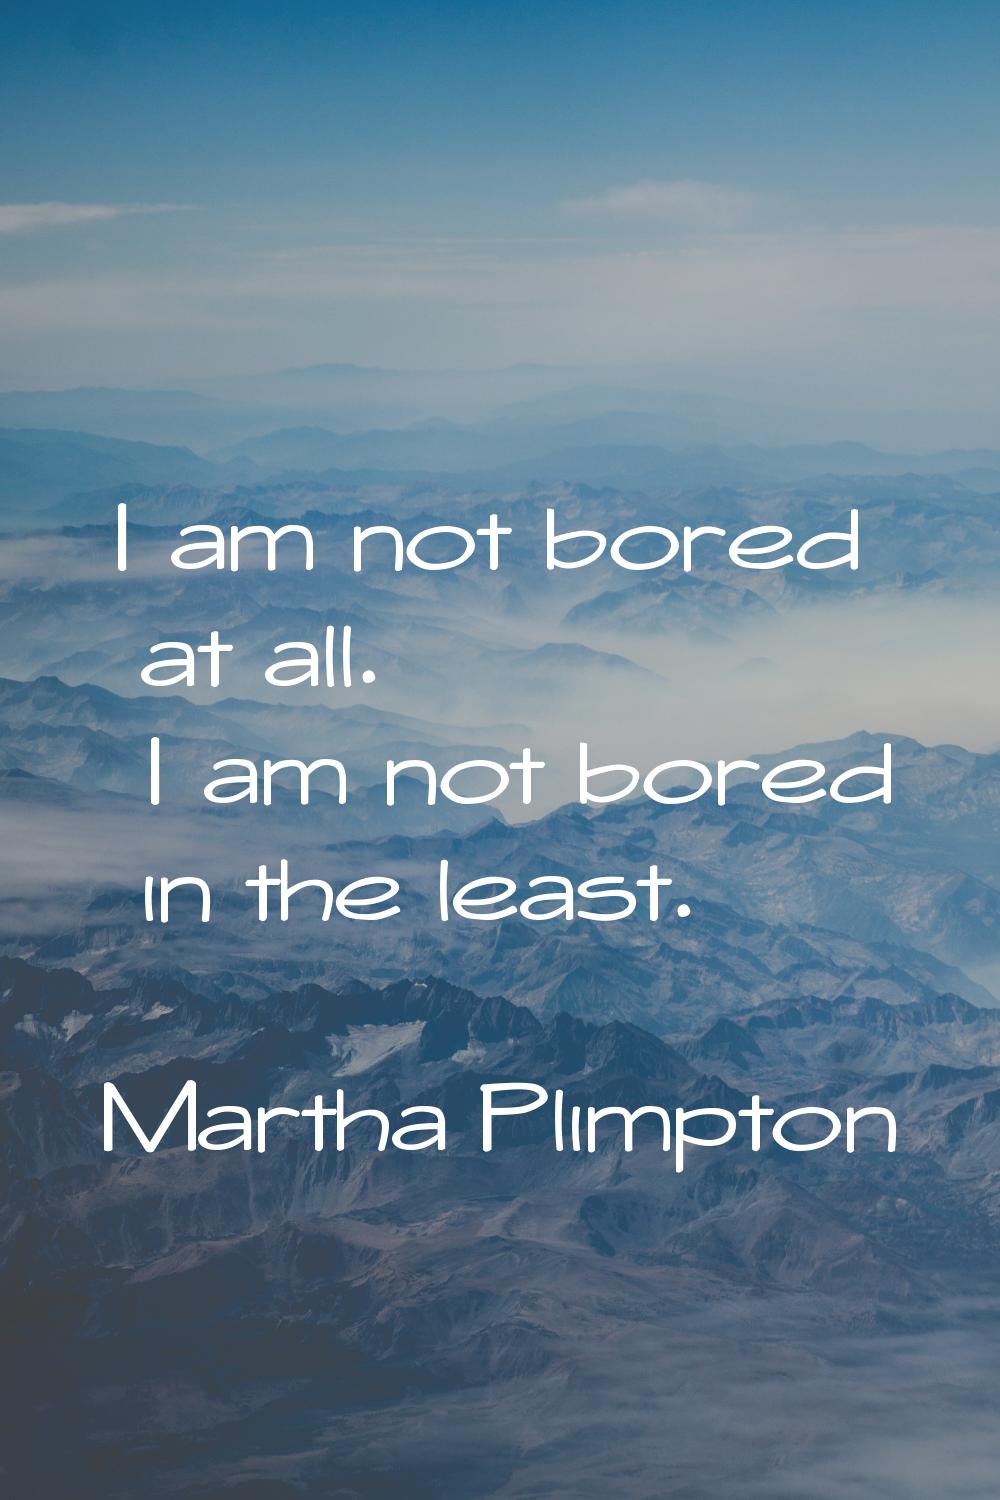 I am not bored at all. I am not bored in the least.